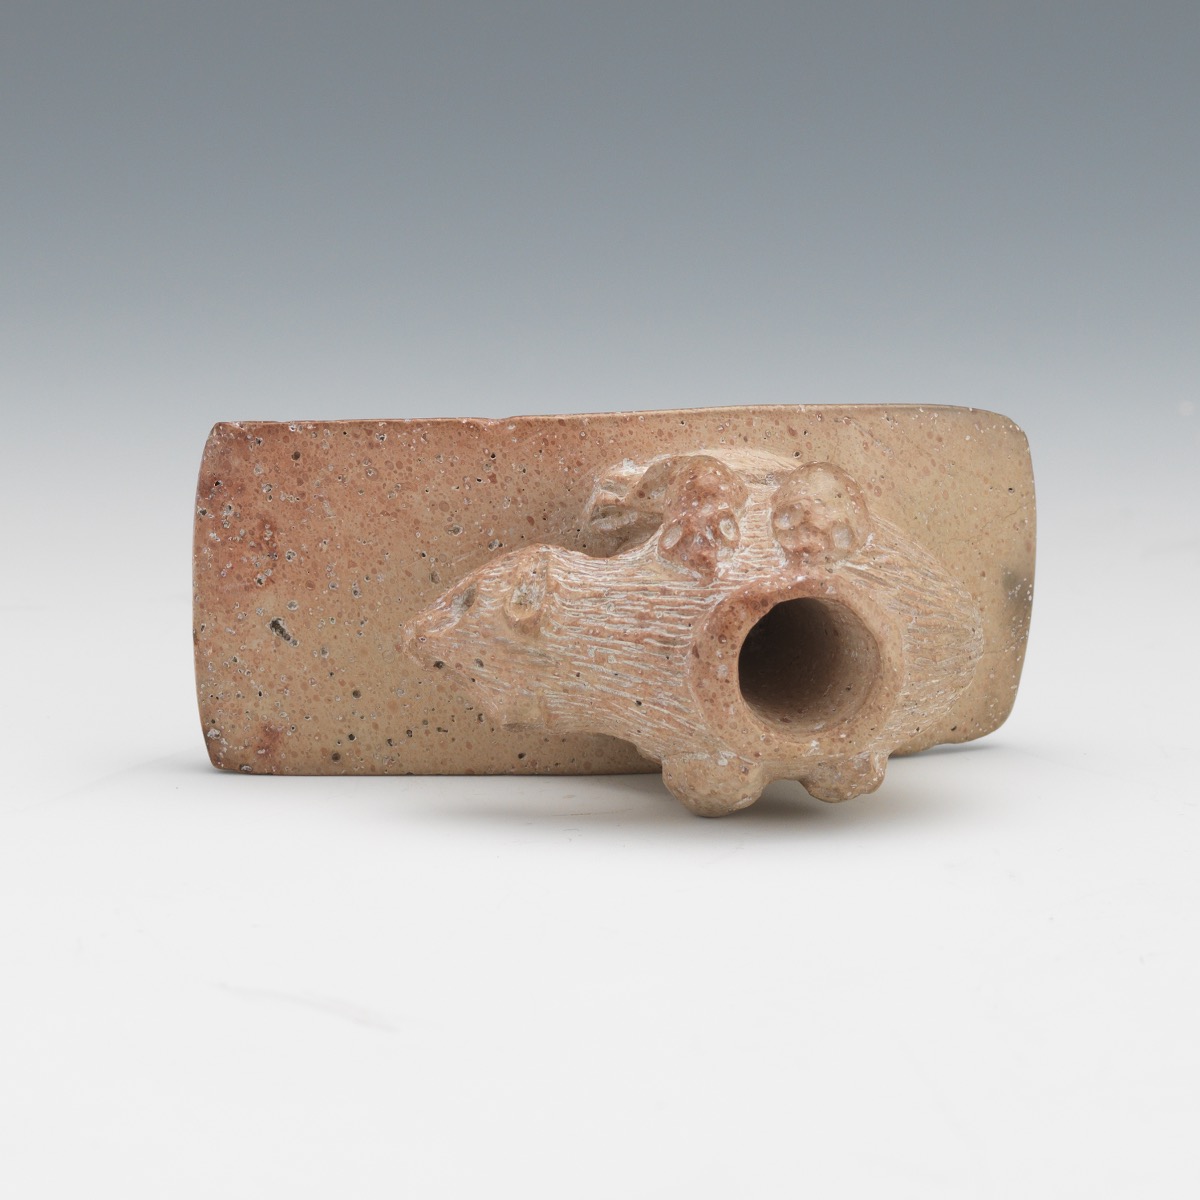 Carved Effigy Pipe of an Opssom - Image 6 of 7